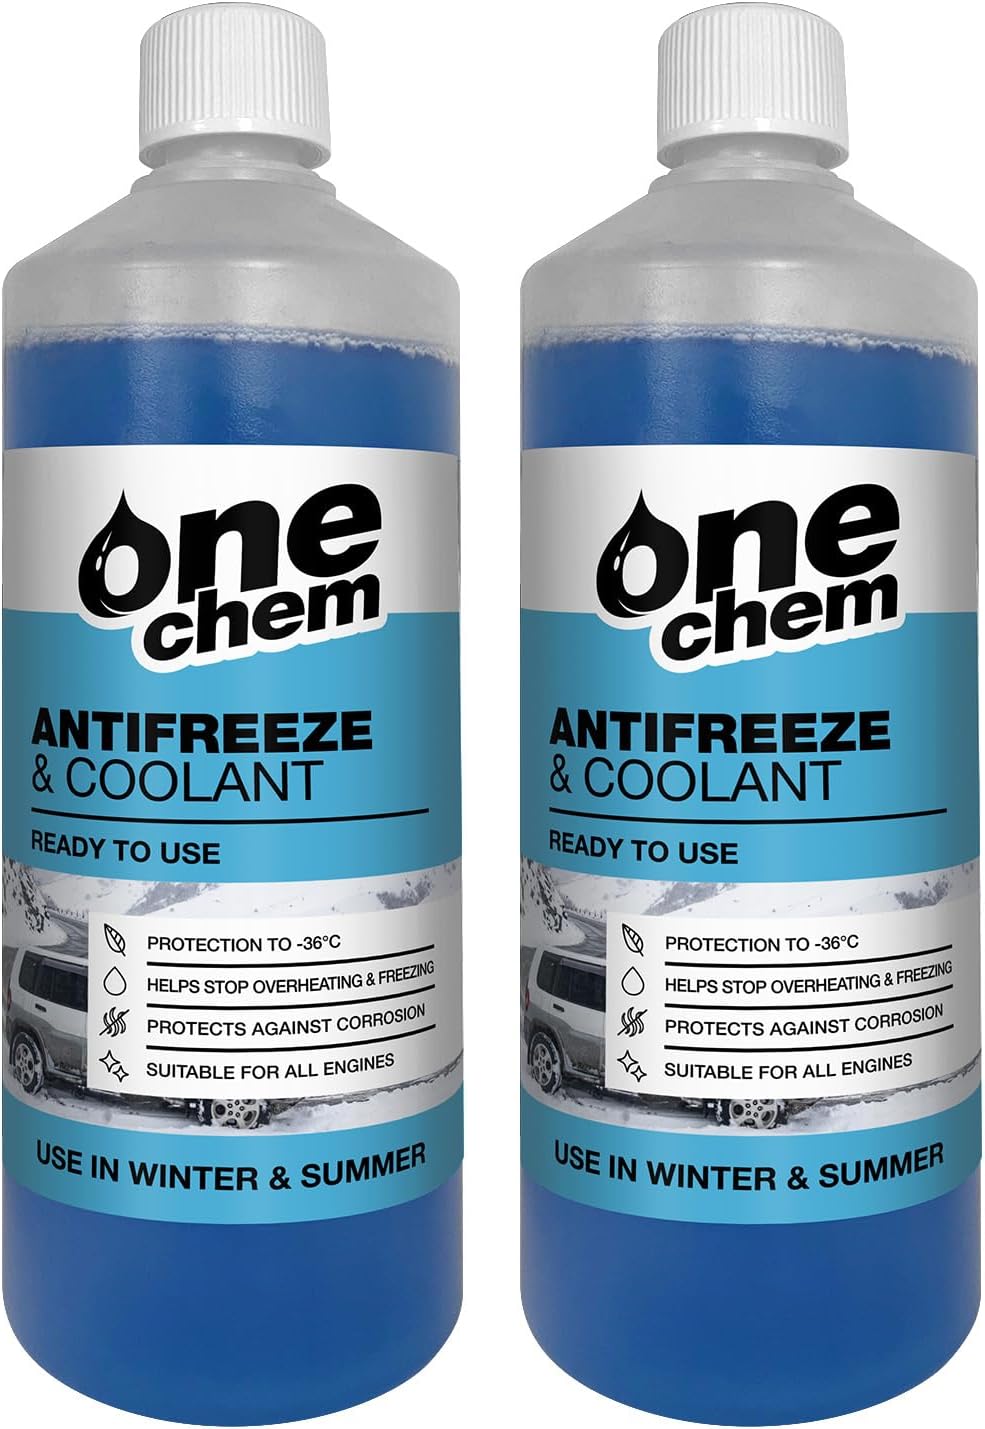 One Chem Antifreeze and Coolant 2 x 1L - Effective down to -36°C